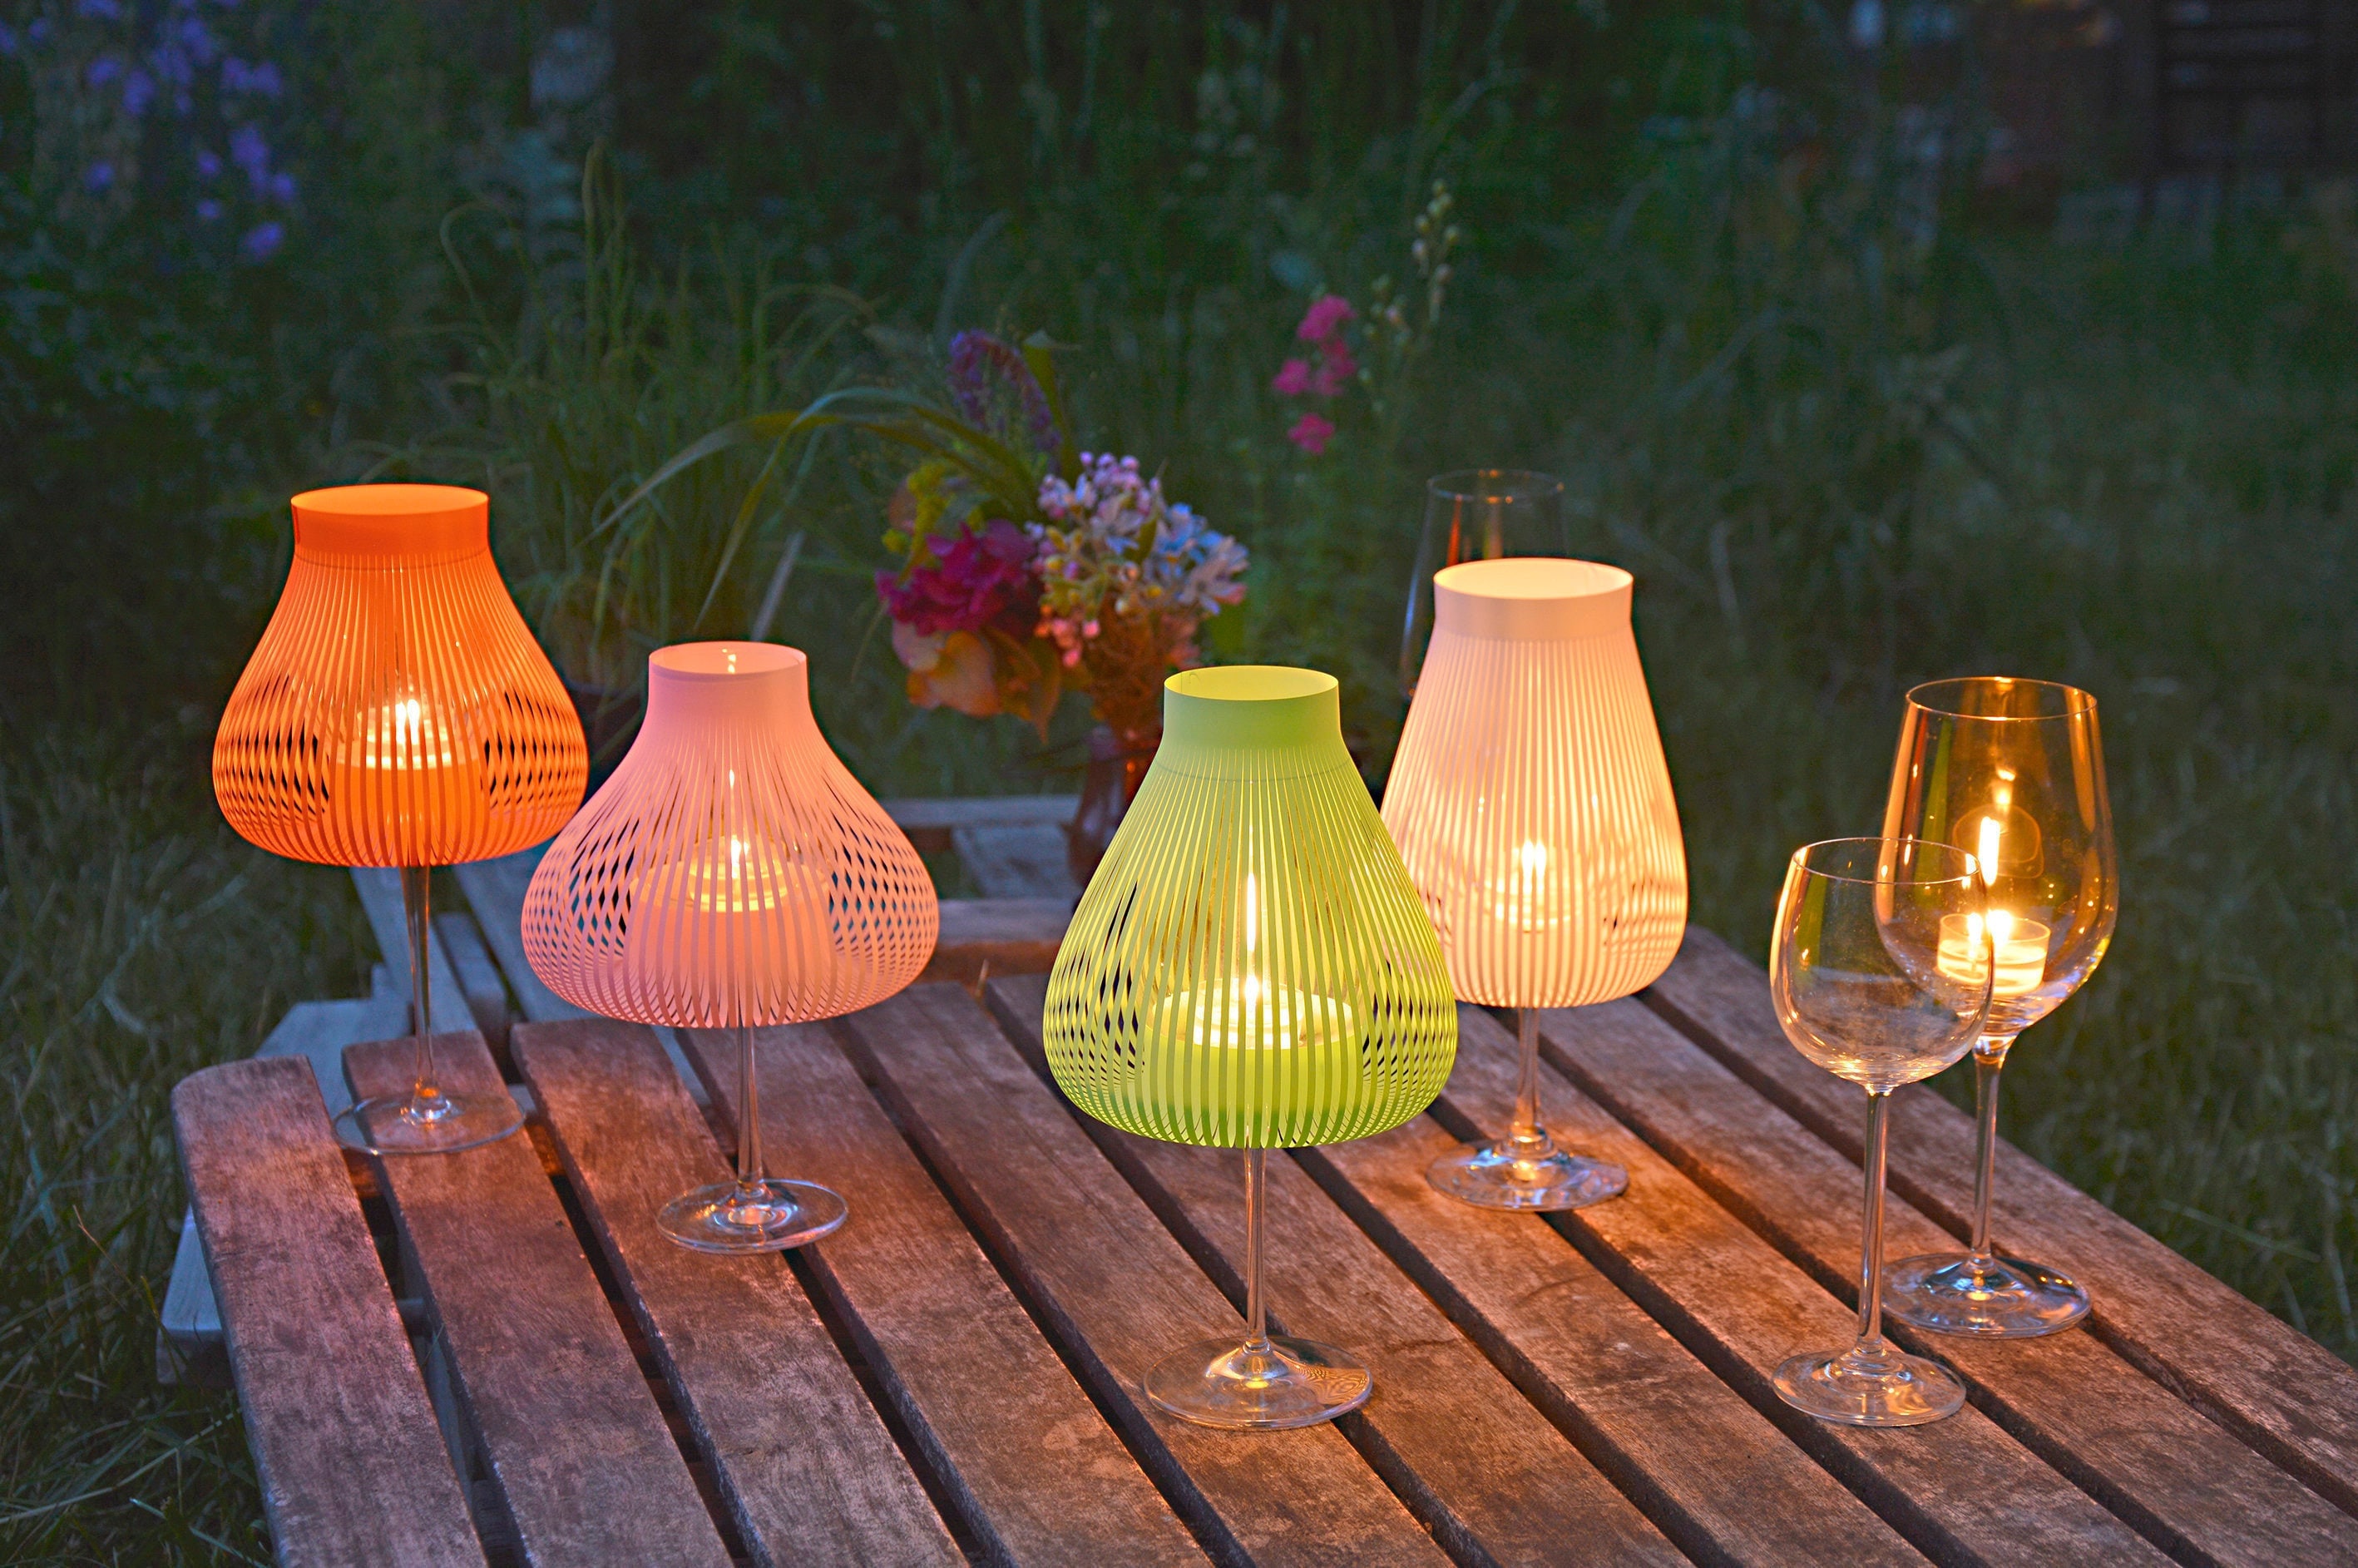 Party Garden Lamp Holder, Candle Tea Shades Glasses, MOLLY Unique of Decor, Lamp, Wine for MISS Decoration, Light 4 Etsy Set Table - New Zealand